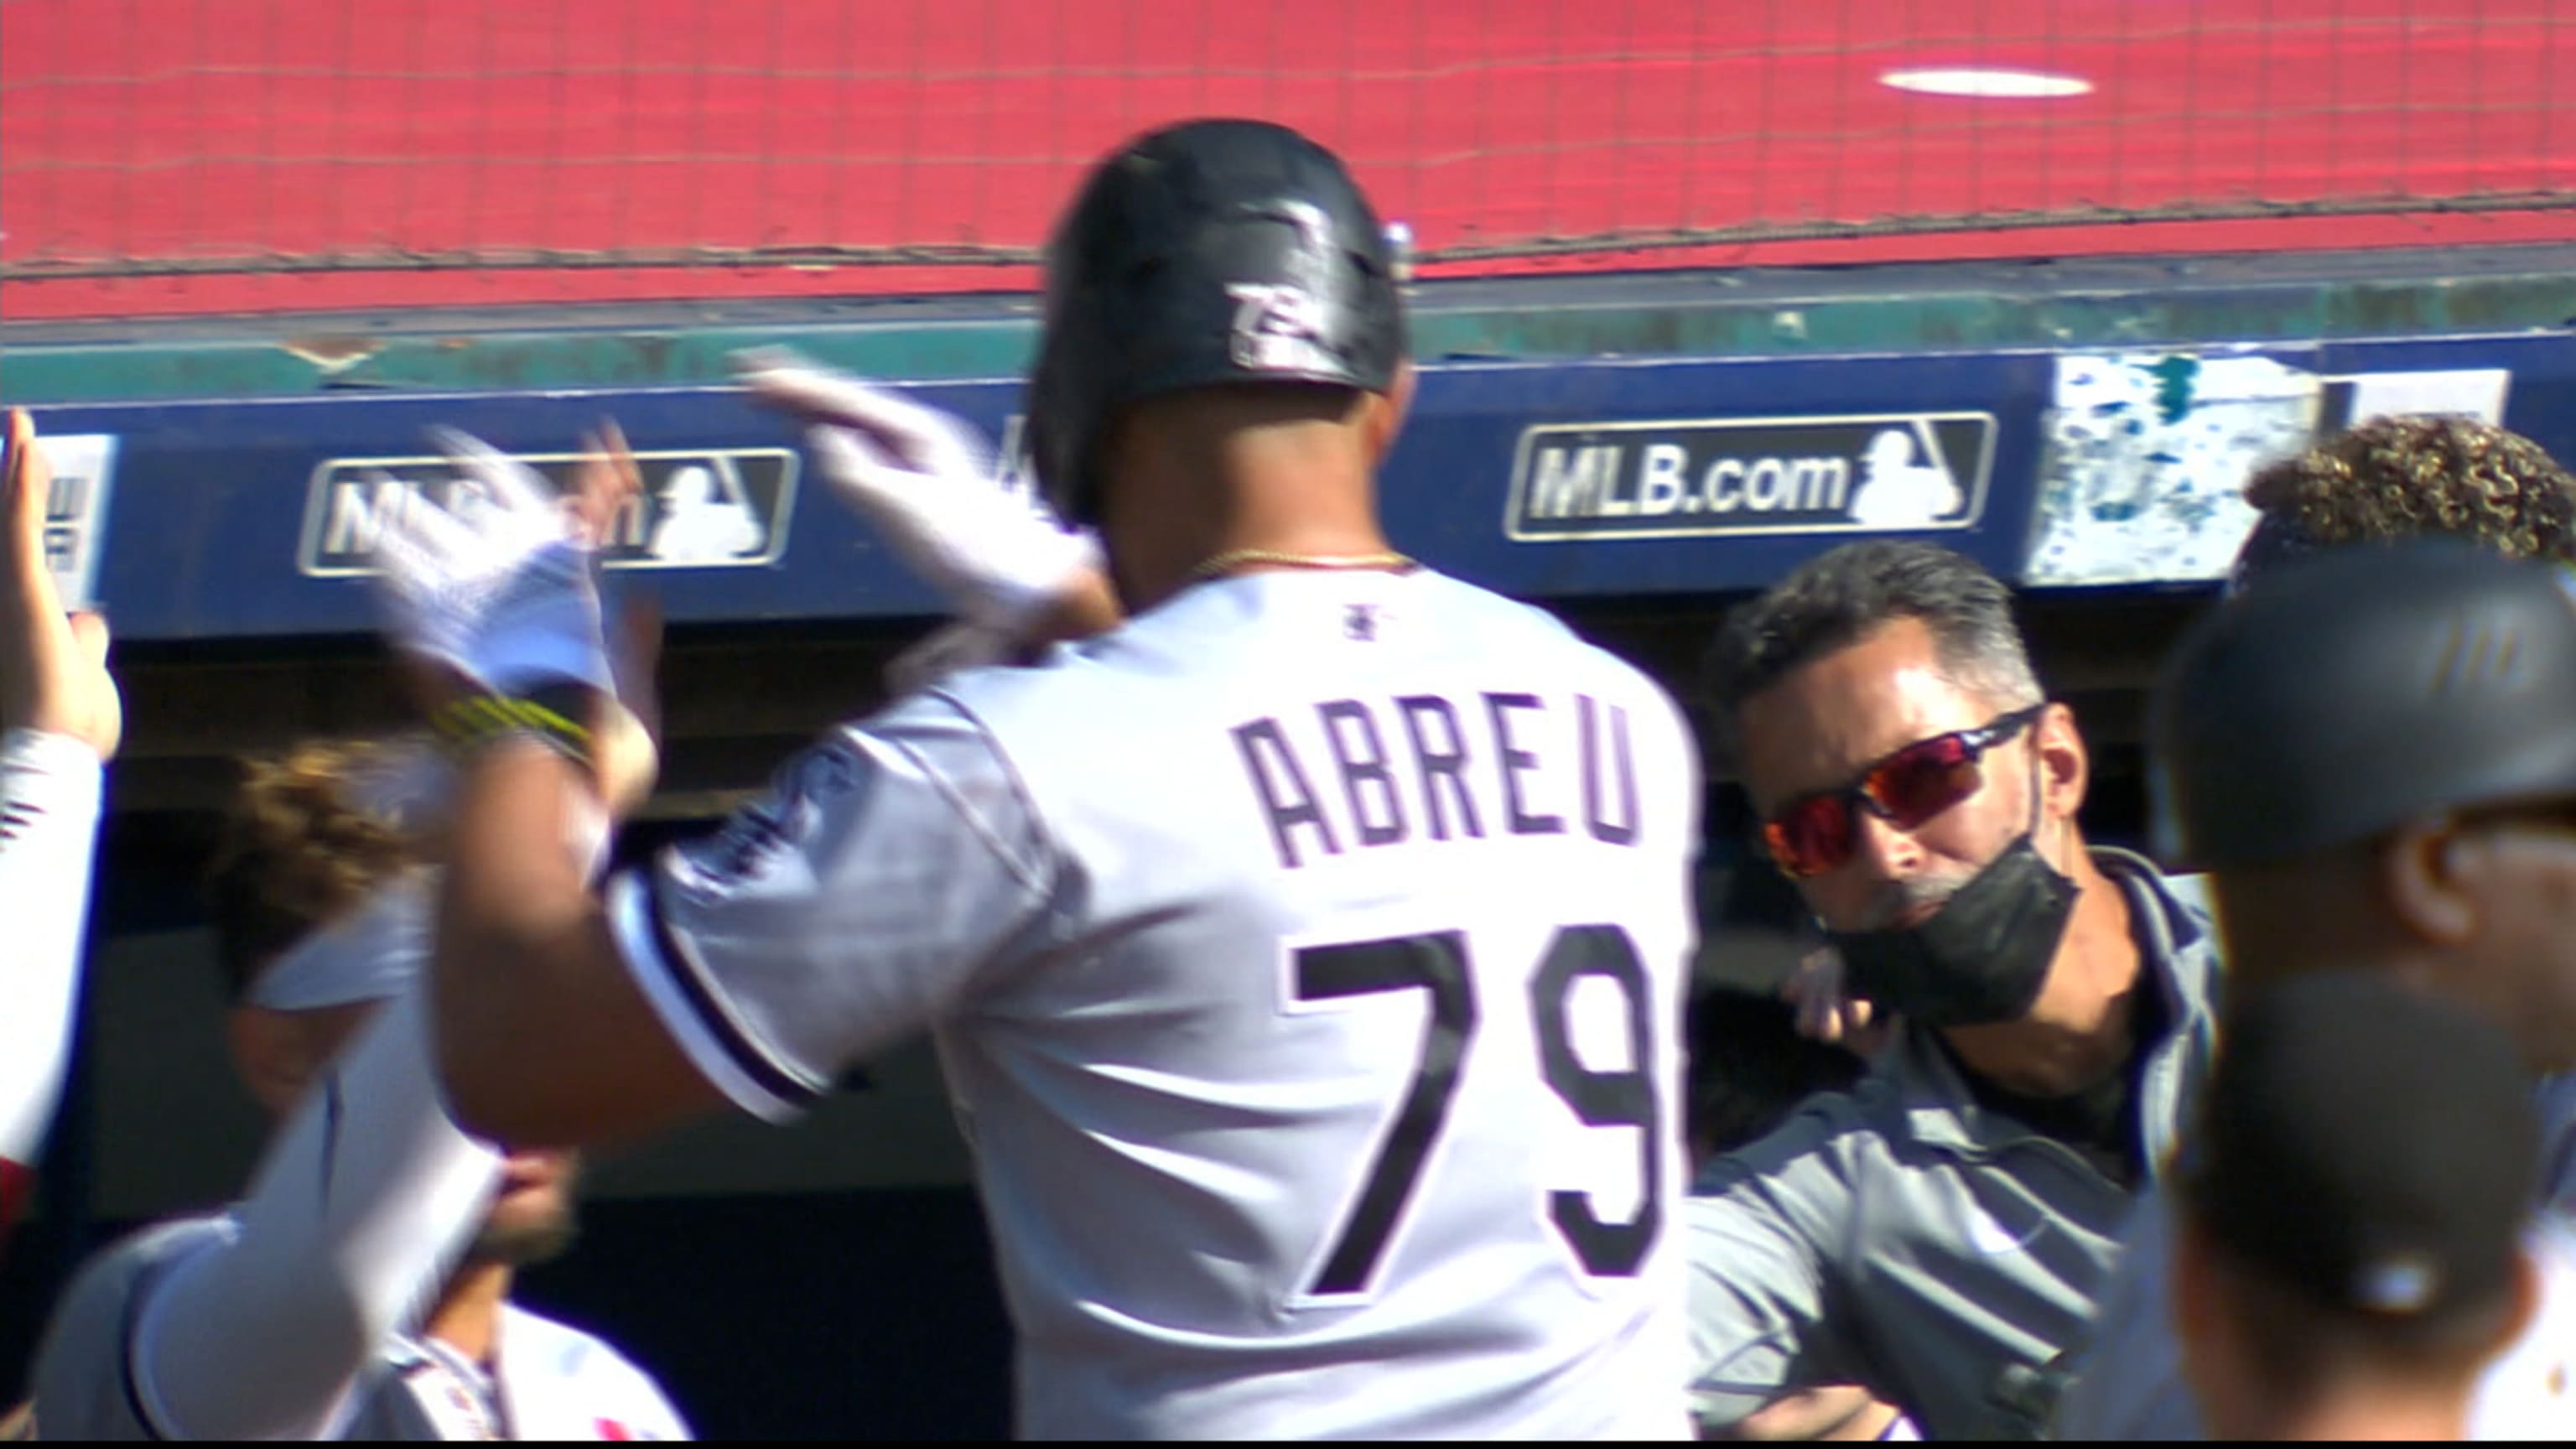 Jose Abreu to Bat Cleanup vs. White Sox on Opening Day